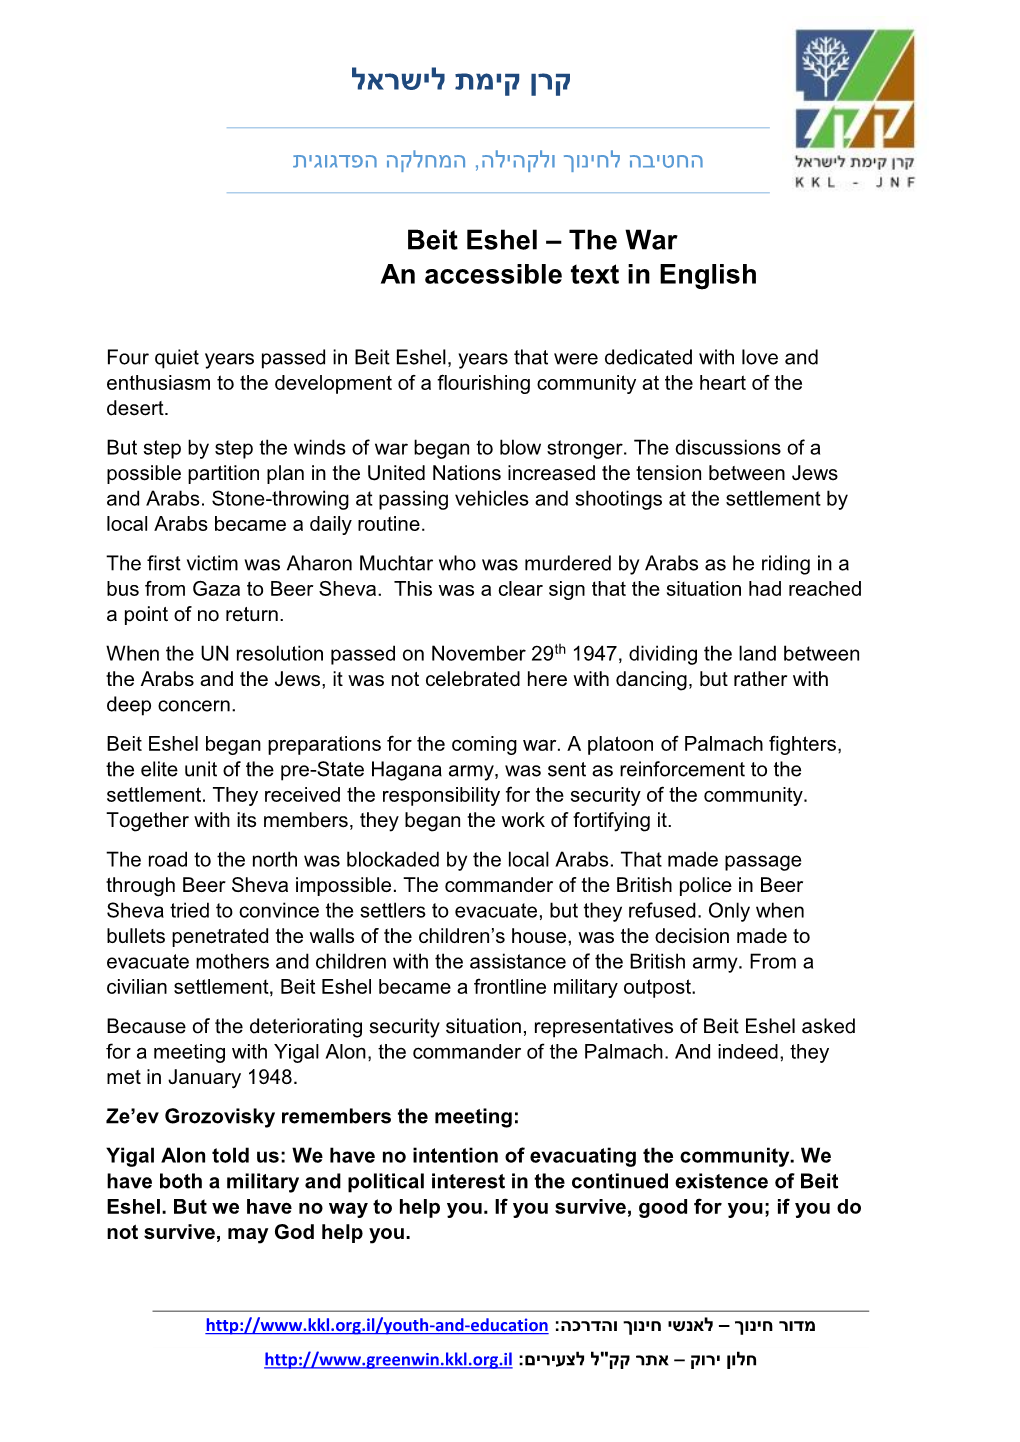 Beit Eshel – the War an Accessible Text in English